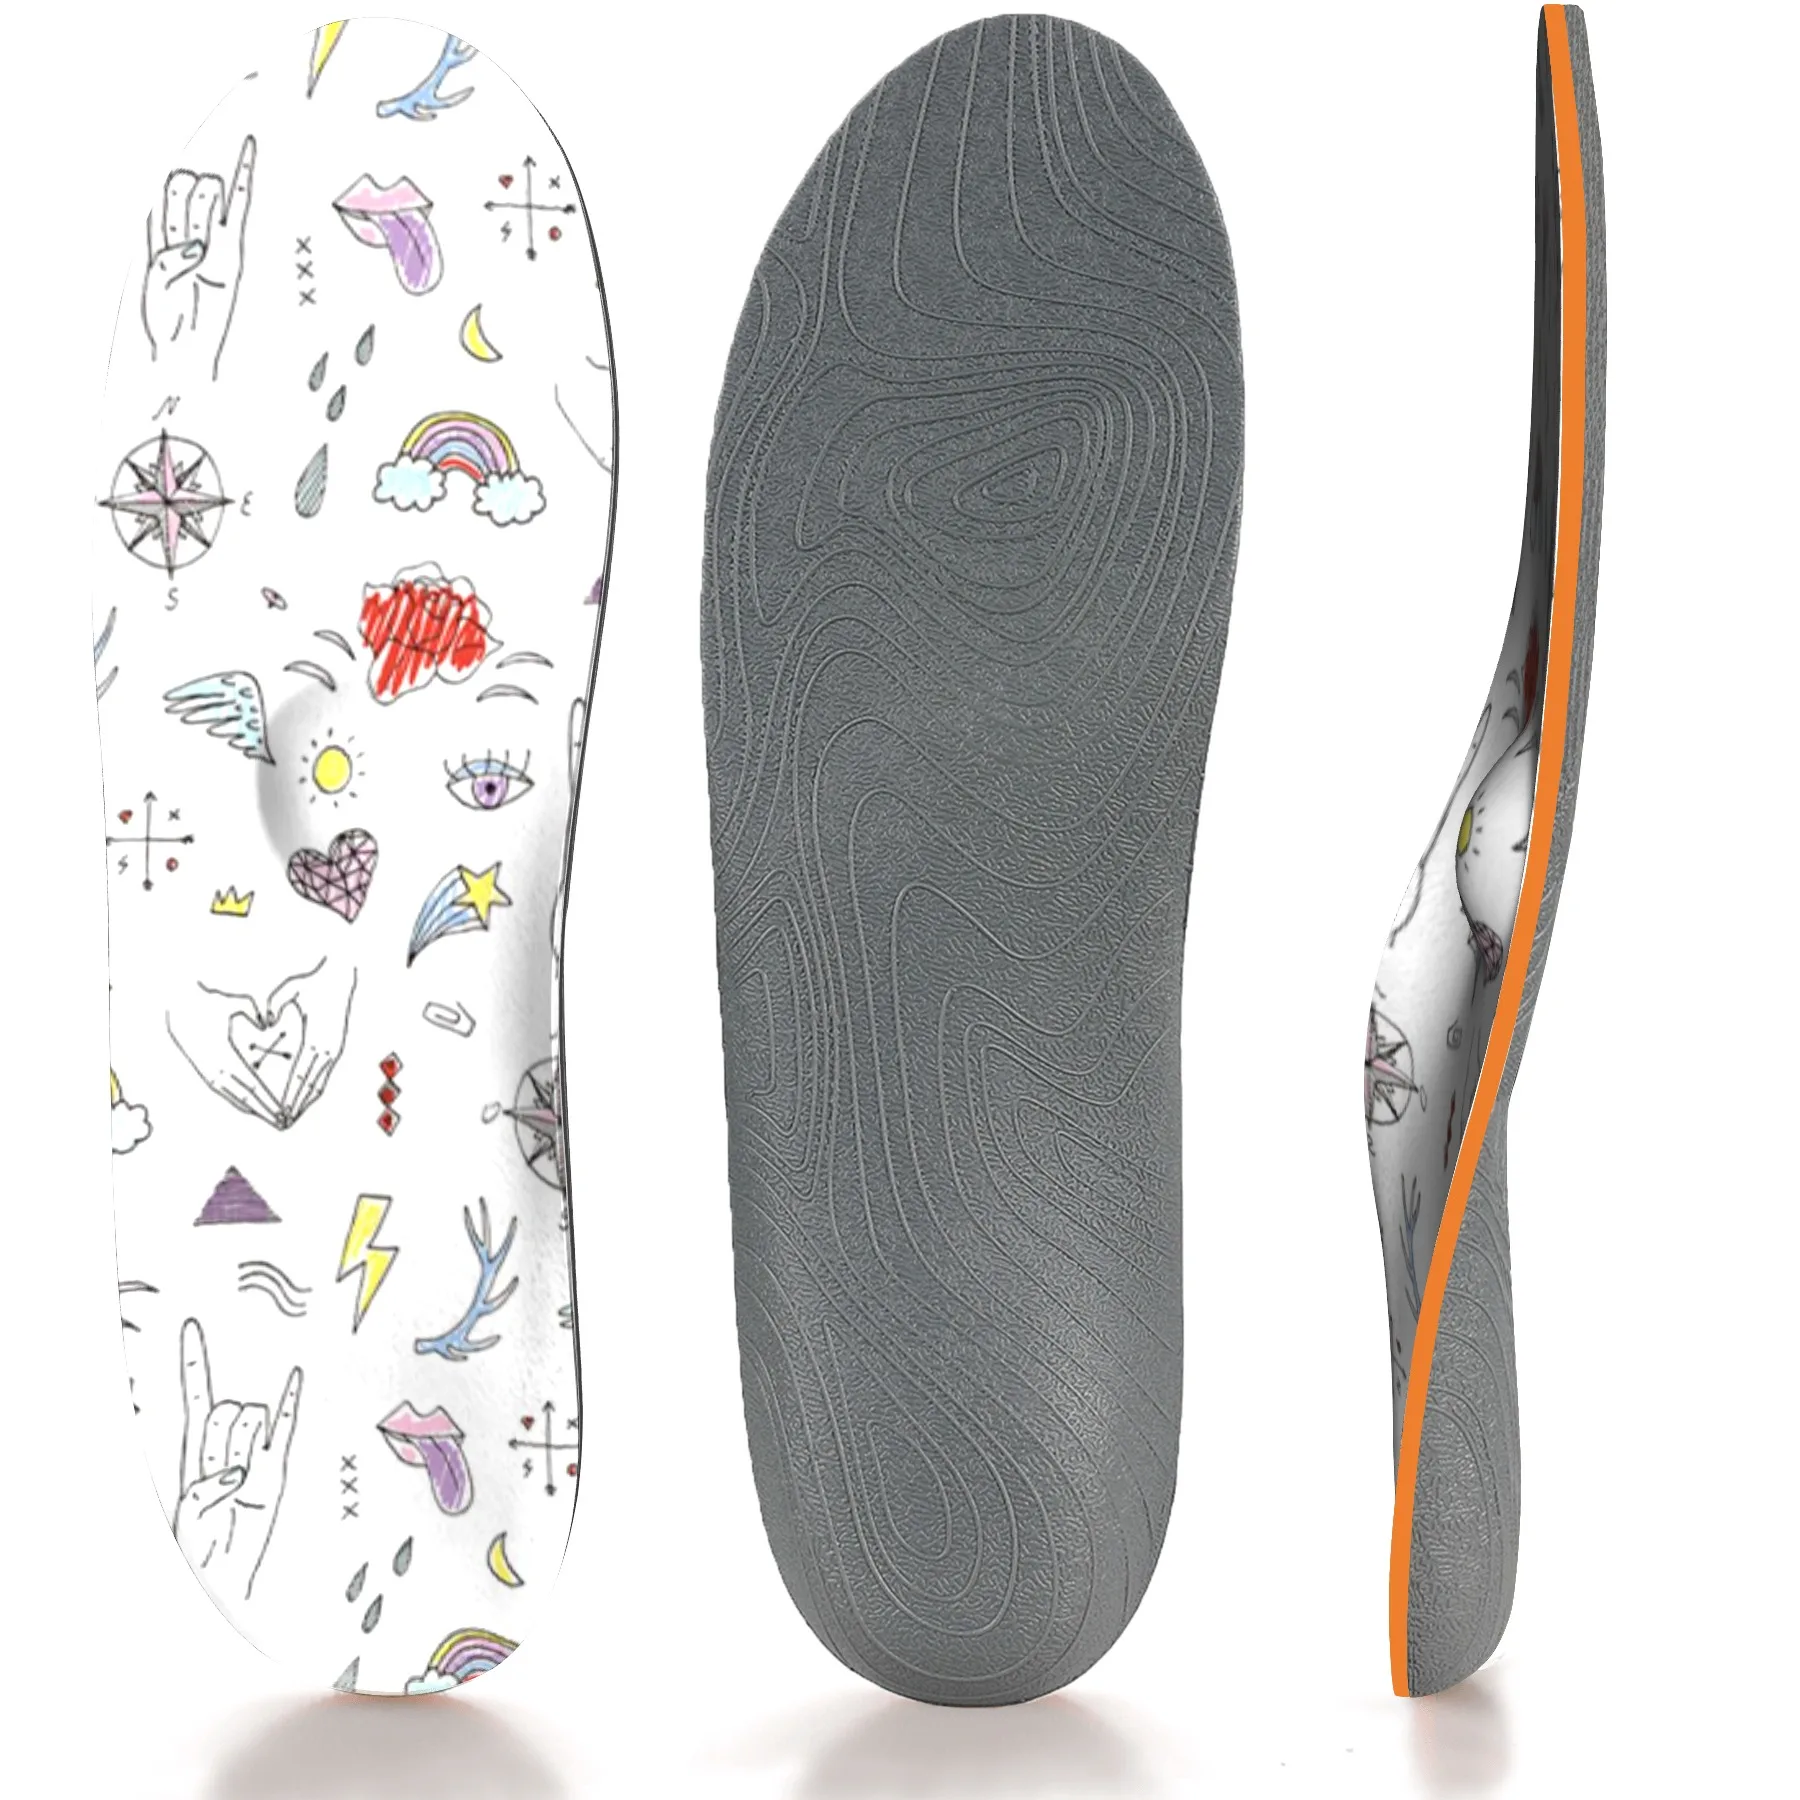 SNEAKER Insoles Men Woman Shoes Promote Foot Blood Circulation Sports Shock-absorbing Insole